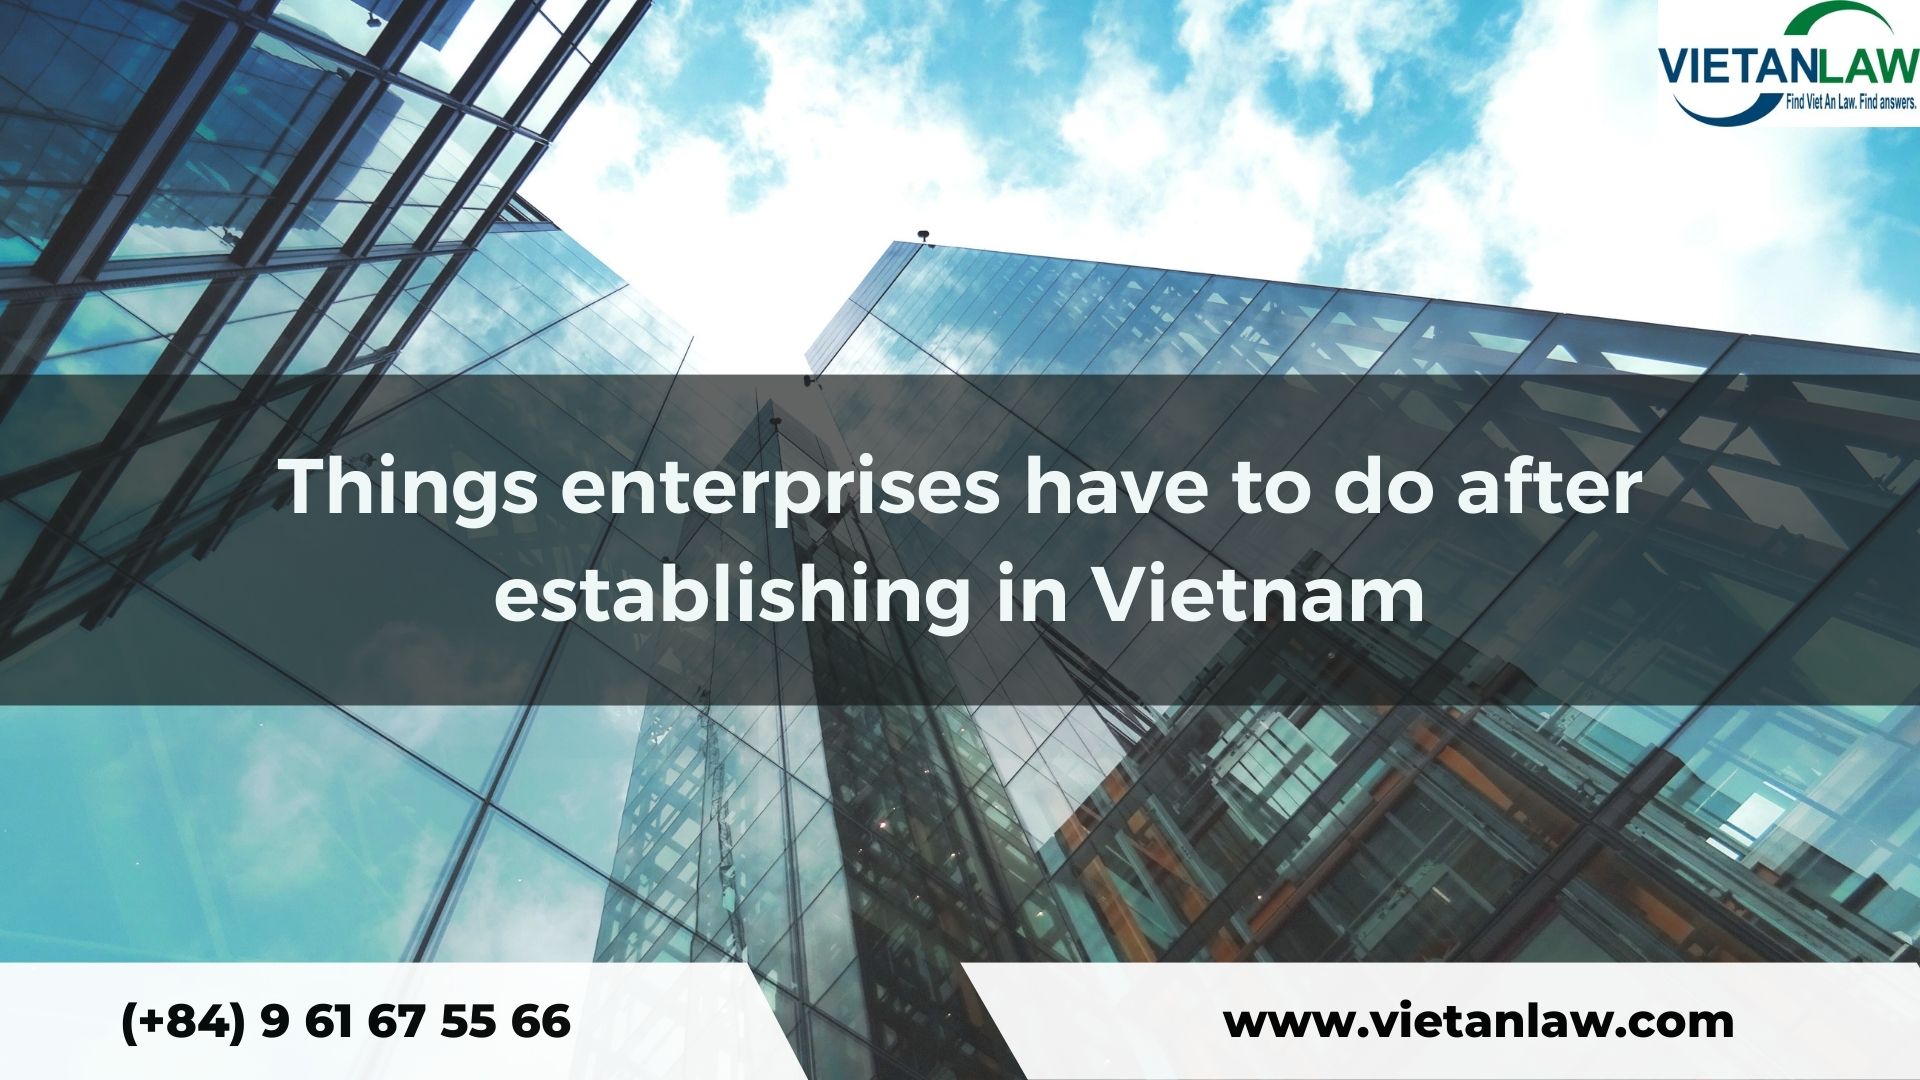 Things enterprises have to do after establishing in Vietnam